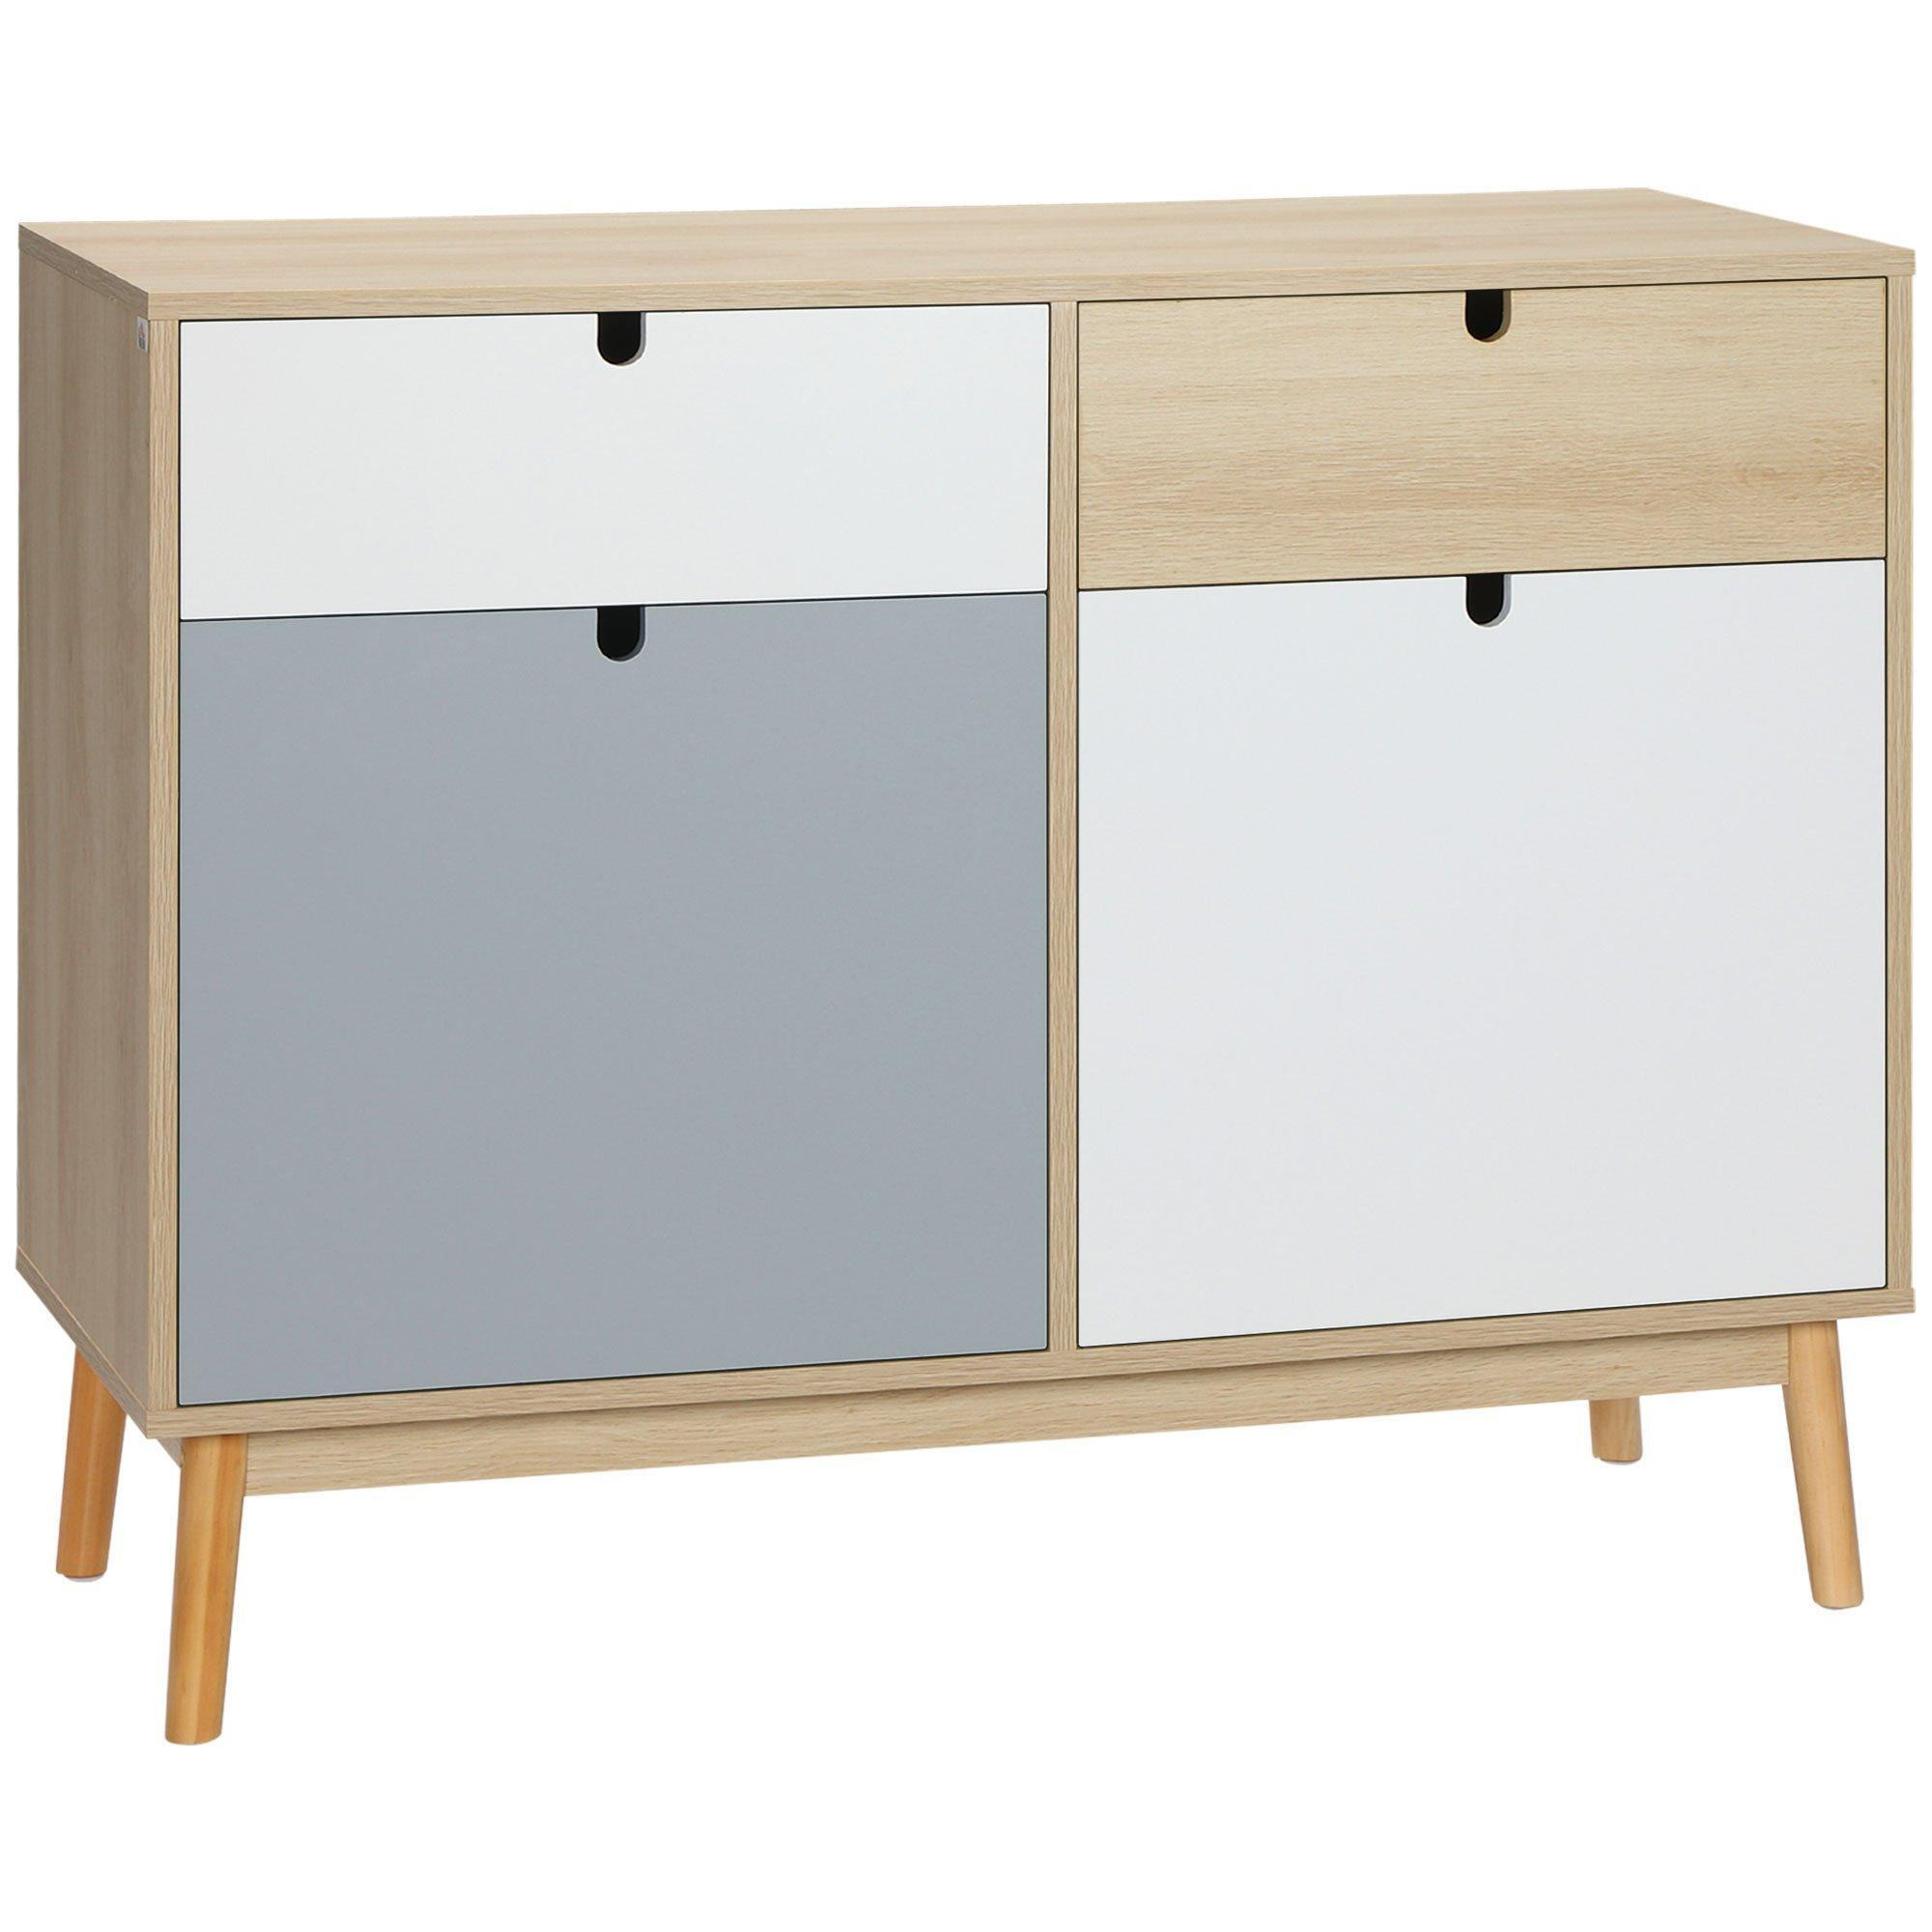 Sideboard Storage Cabinet Kitchen Cupboard with Drawers for Bedroom - image 1